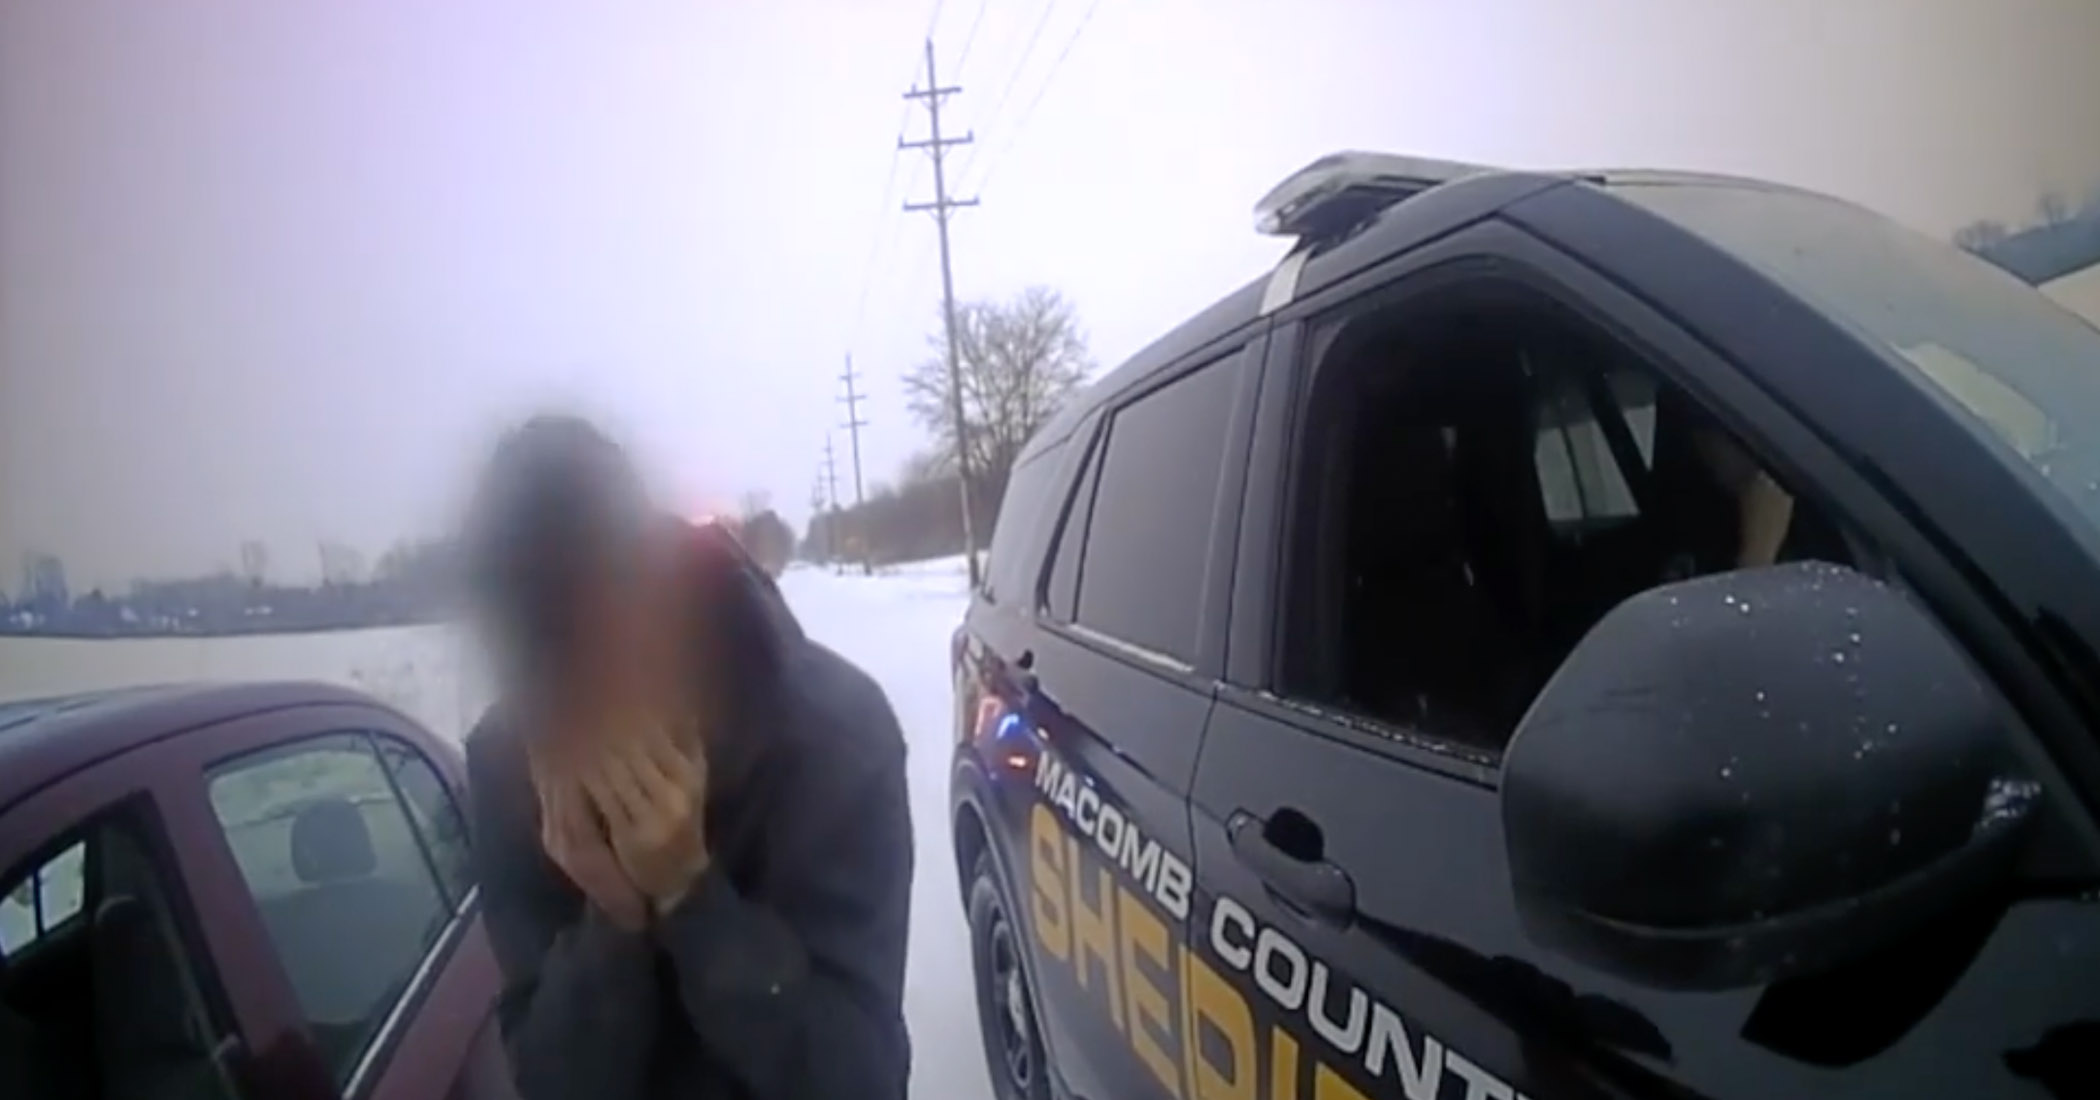 NextImg:‘I could use a hug’: Officer responds to a driver in distress by lending his shoulder to cry on